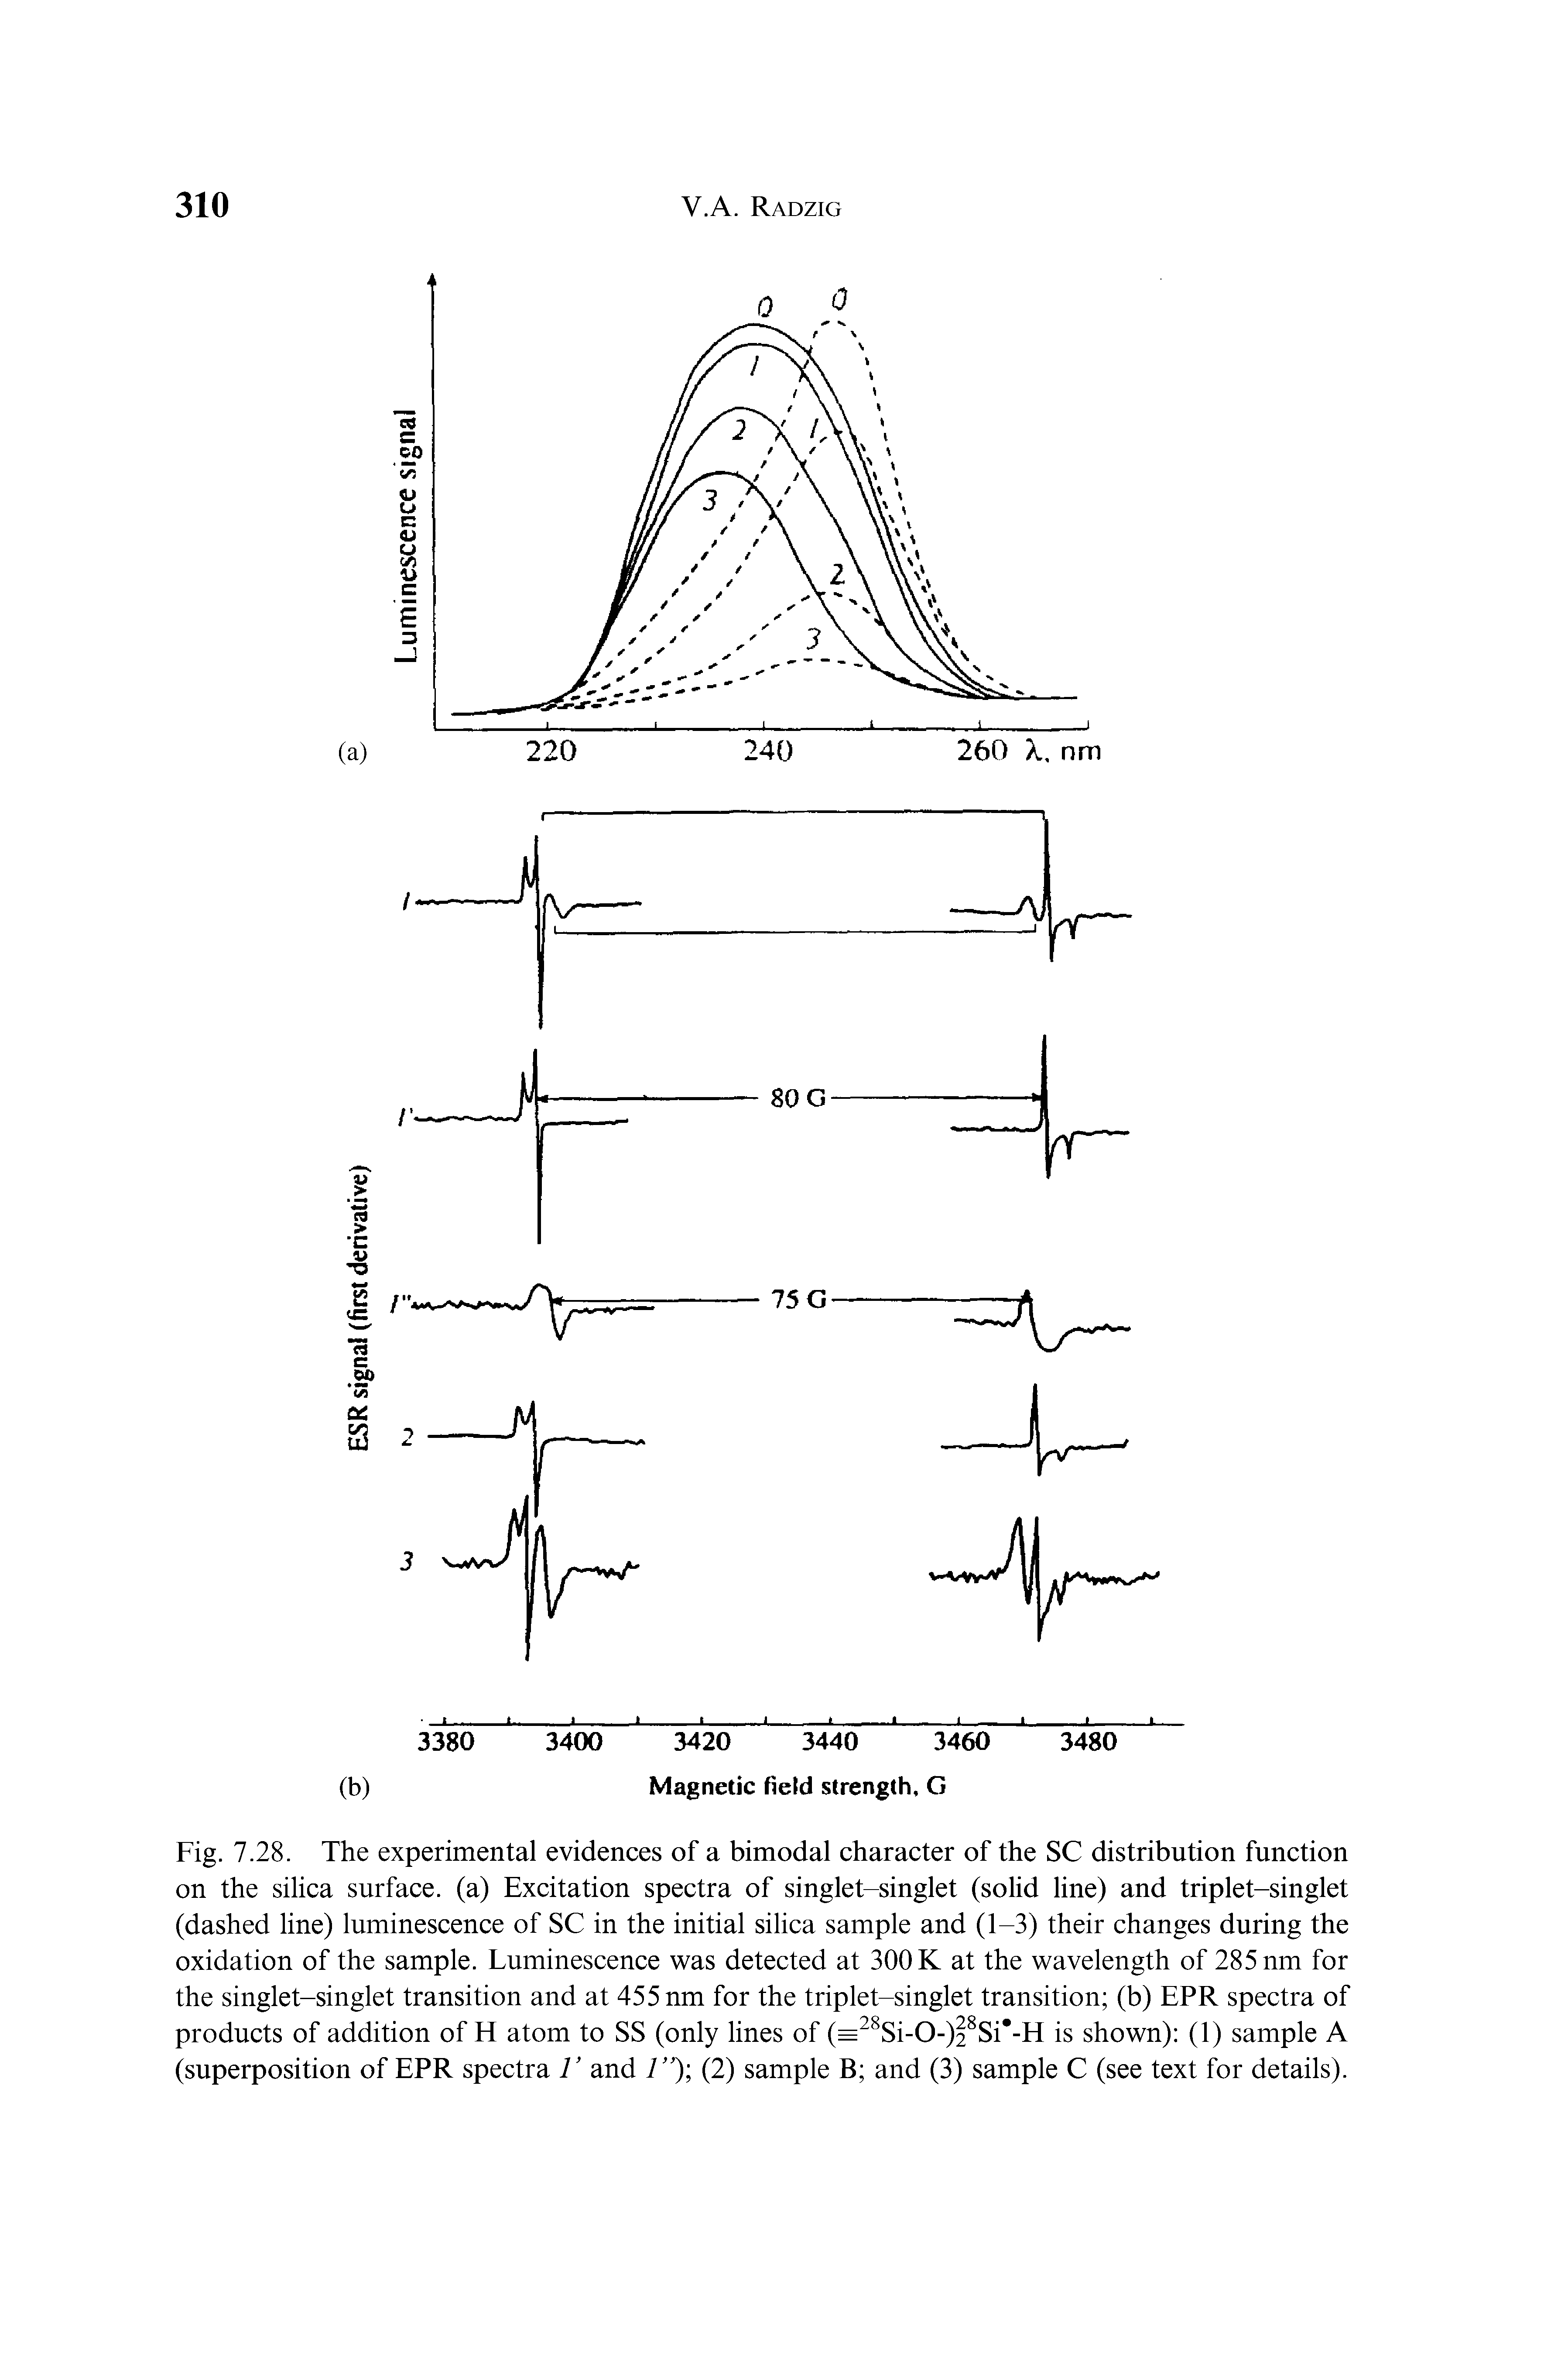 Fig. 7.28. The experimental evidences of a bimodal character of the SC distribution function on the silica surface, (a) Excitation spectra of singlet-singlet (solid line) and triplet-singlet (dashed line) luminescence of SC in the initial silica sample and (1-3) their changes during the oxidation of the sample. Luminescence was detected at 300 K at the wavelength of 285 nm for the singlet-singlet transition and at 455 nm for the triplet-singlet transition (b) EPR spectra of products of addition of H atom to SS (only lines of (=28Si-0-)28Si -H is shown) (1) sample A (superposition of EPR spectra V and 1 ) (2) sample B and (3) sample C (see text for details).